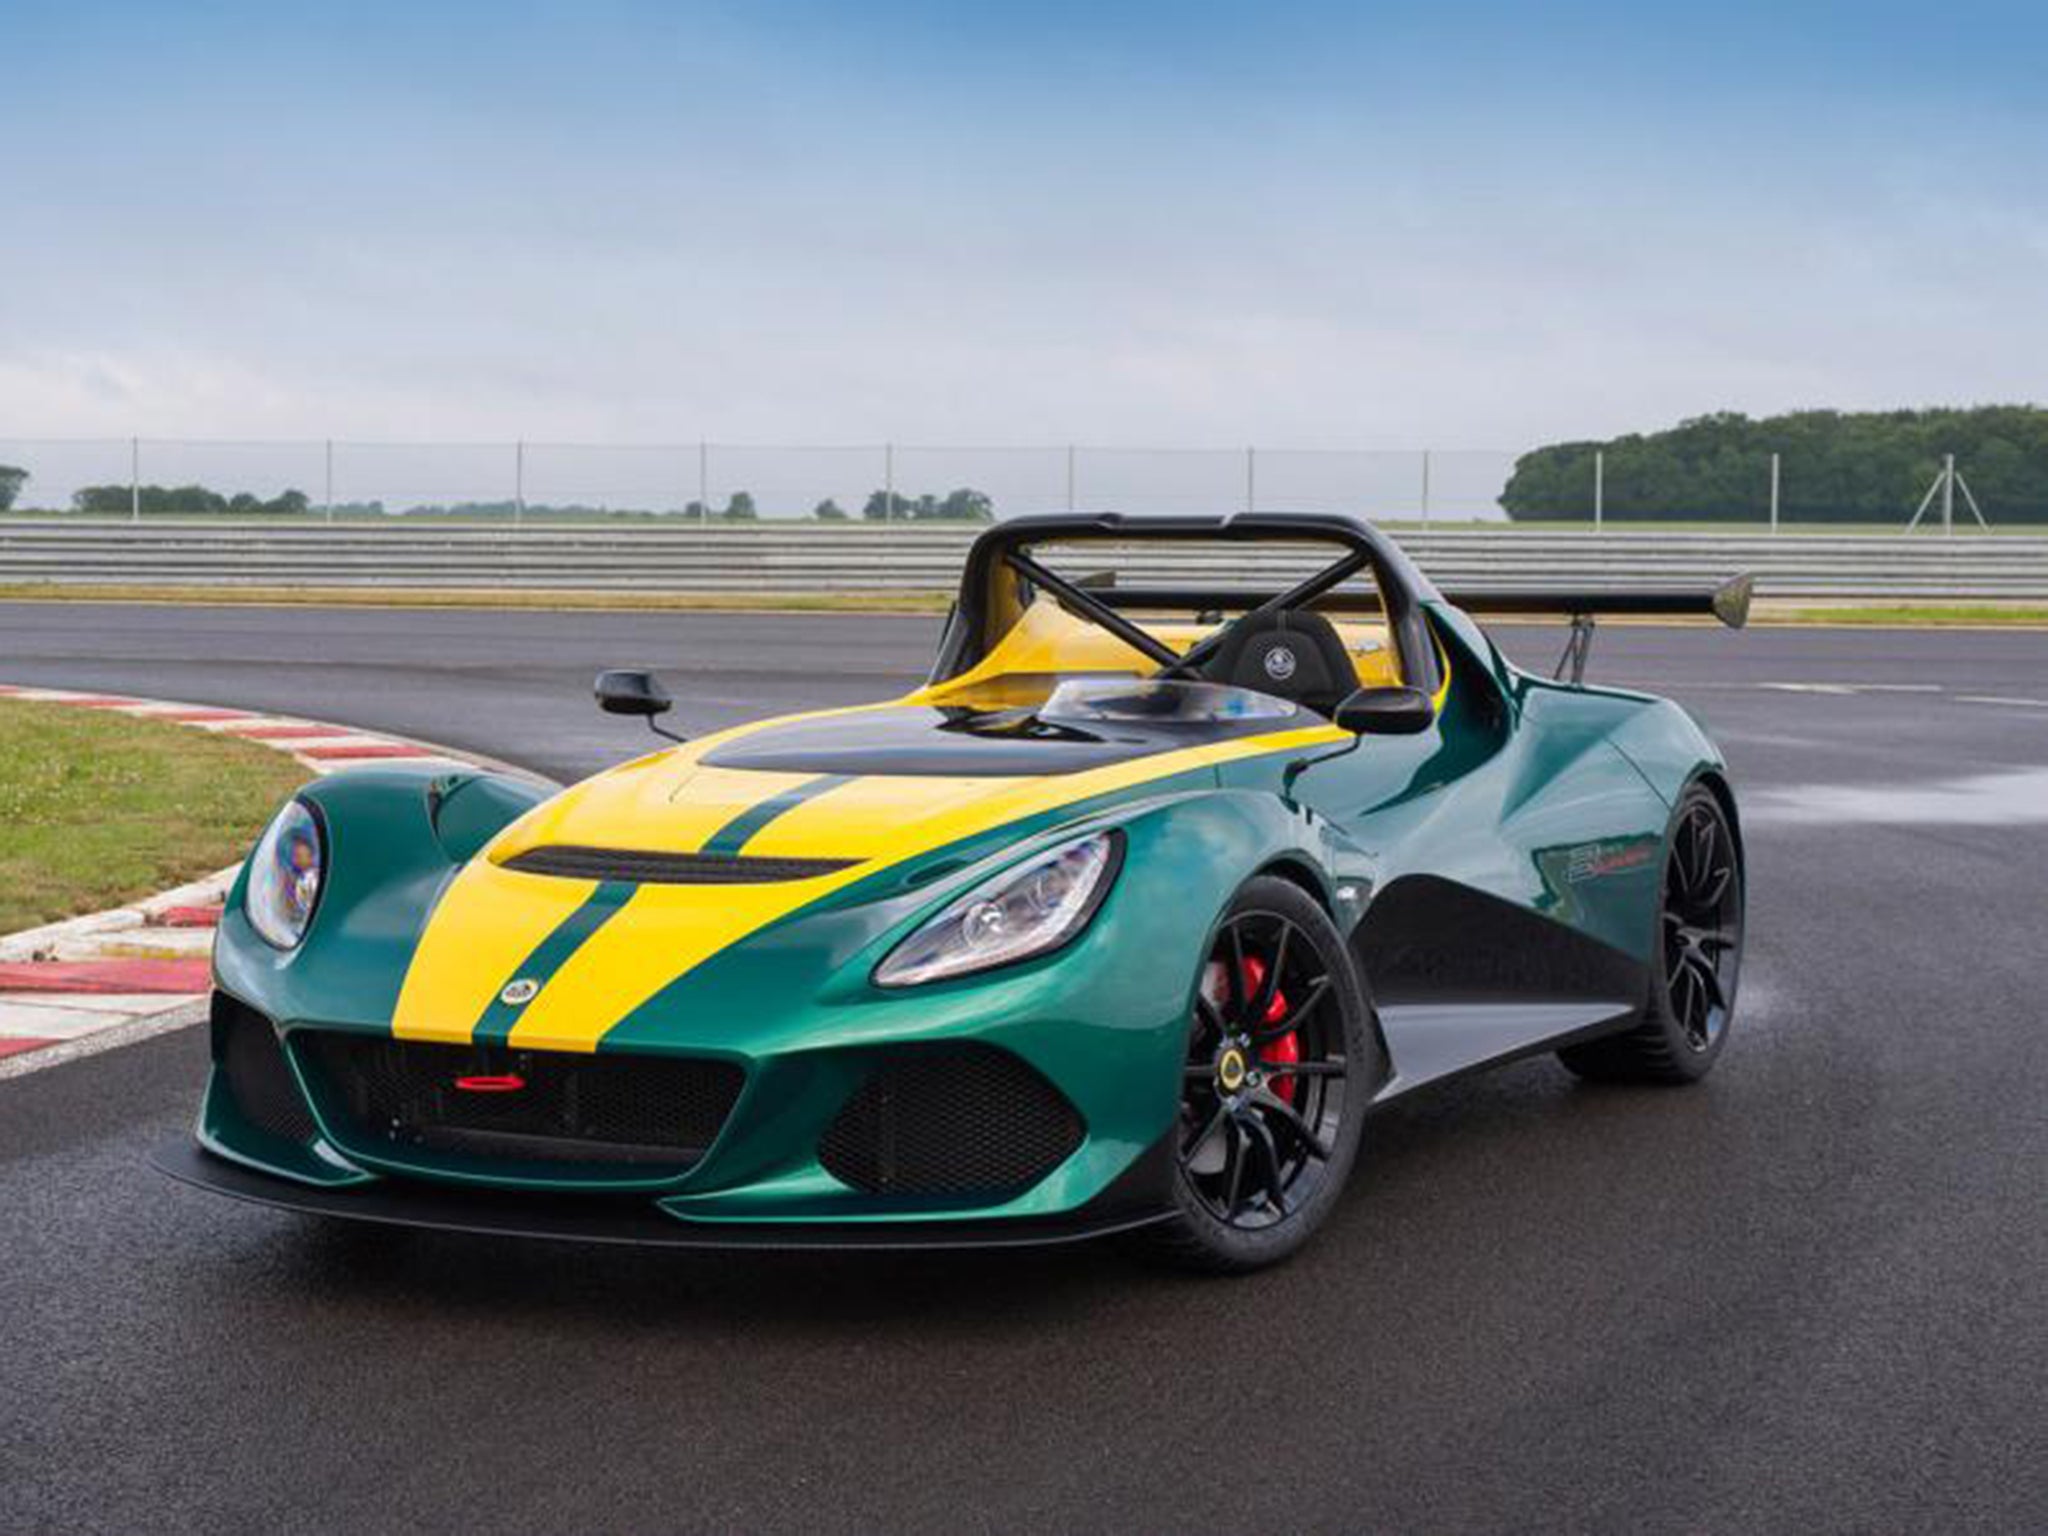 Lotus says the 3-Eleven can tackle the Nürburgring in less than seven minutes